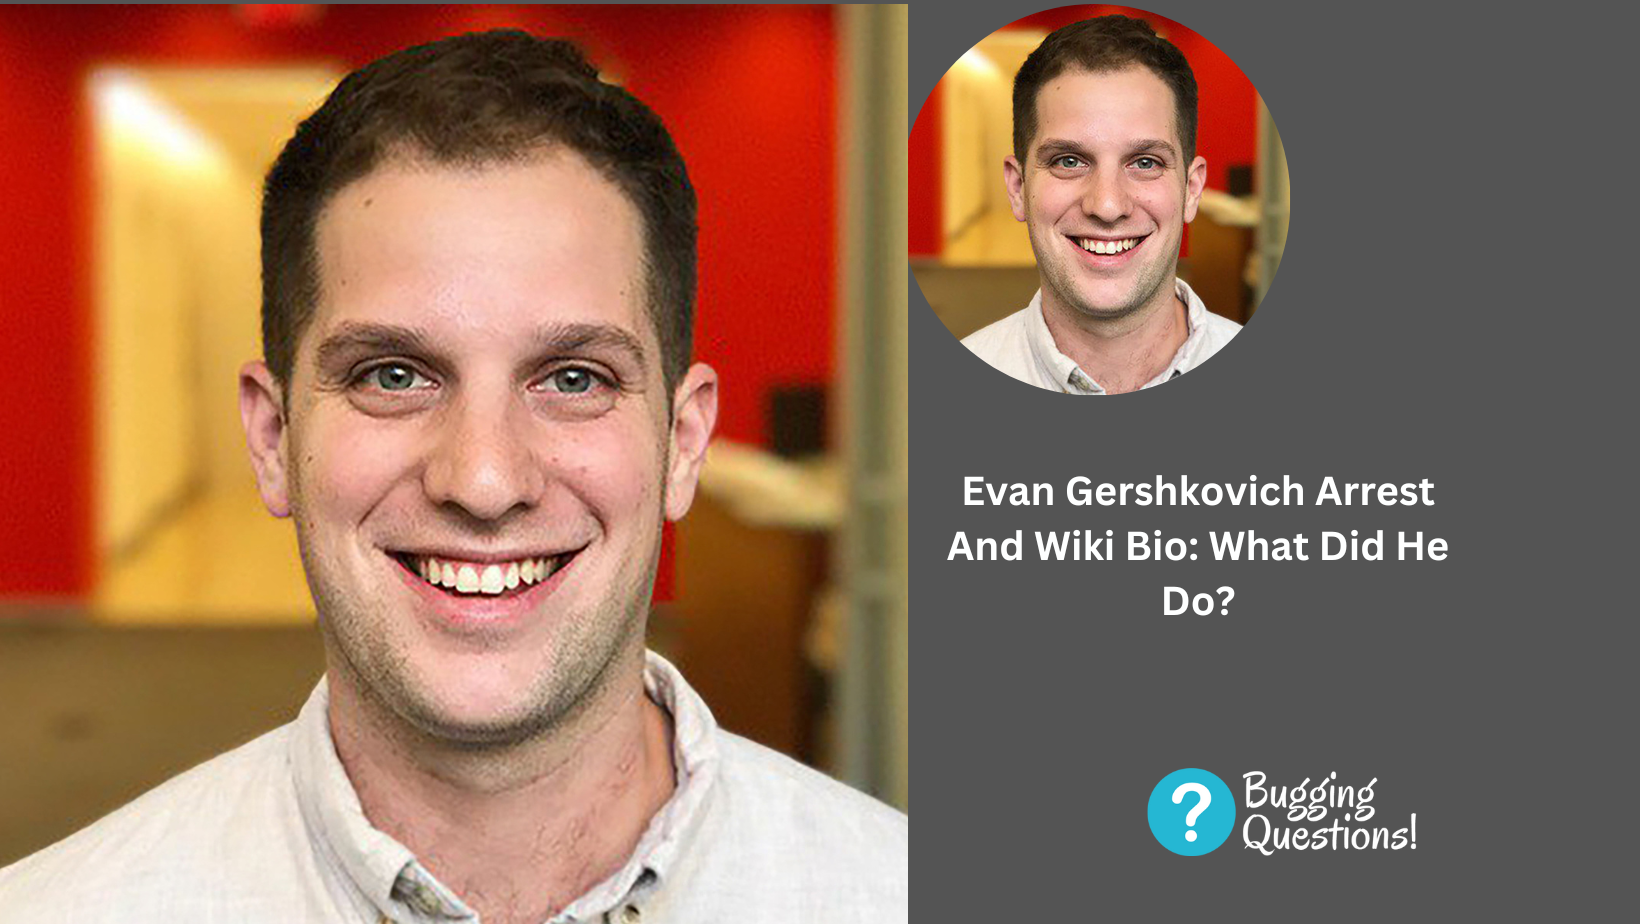 Evan Gershkovich Arrest And Wiki Bio: What Did He Do?